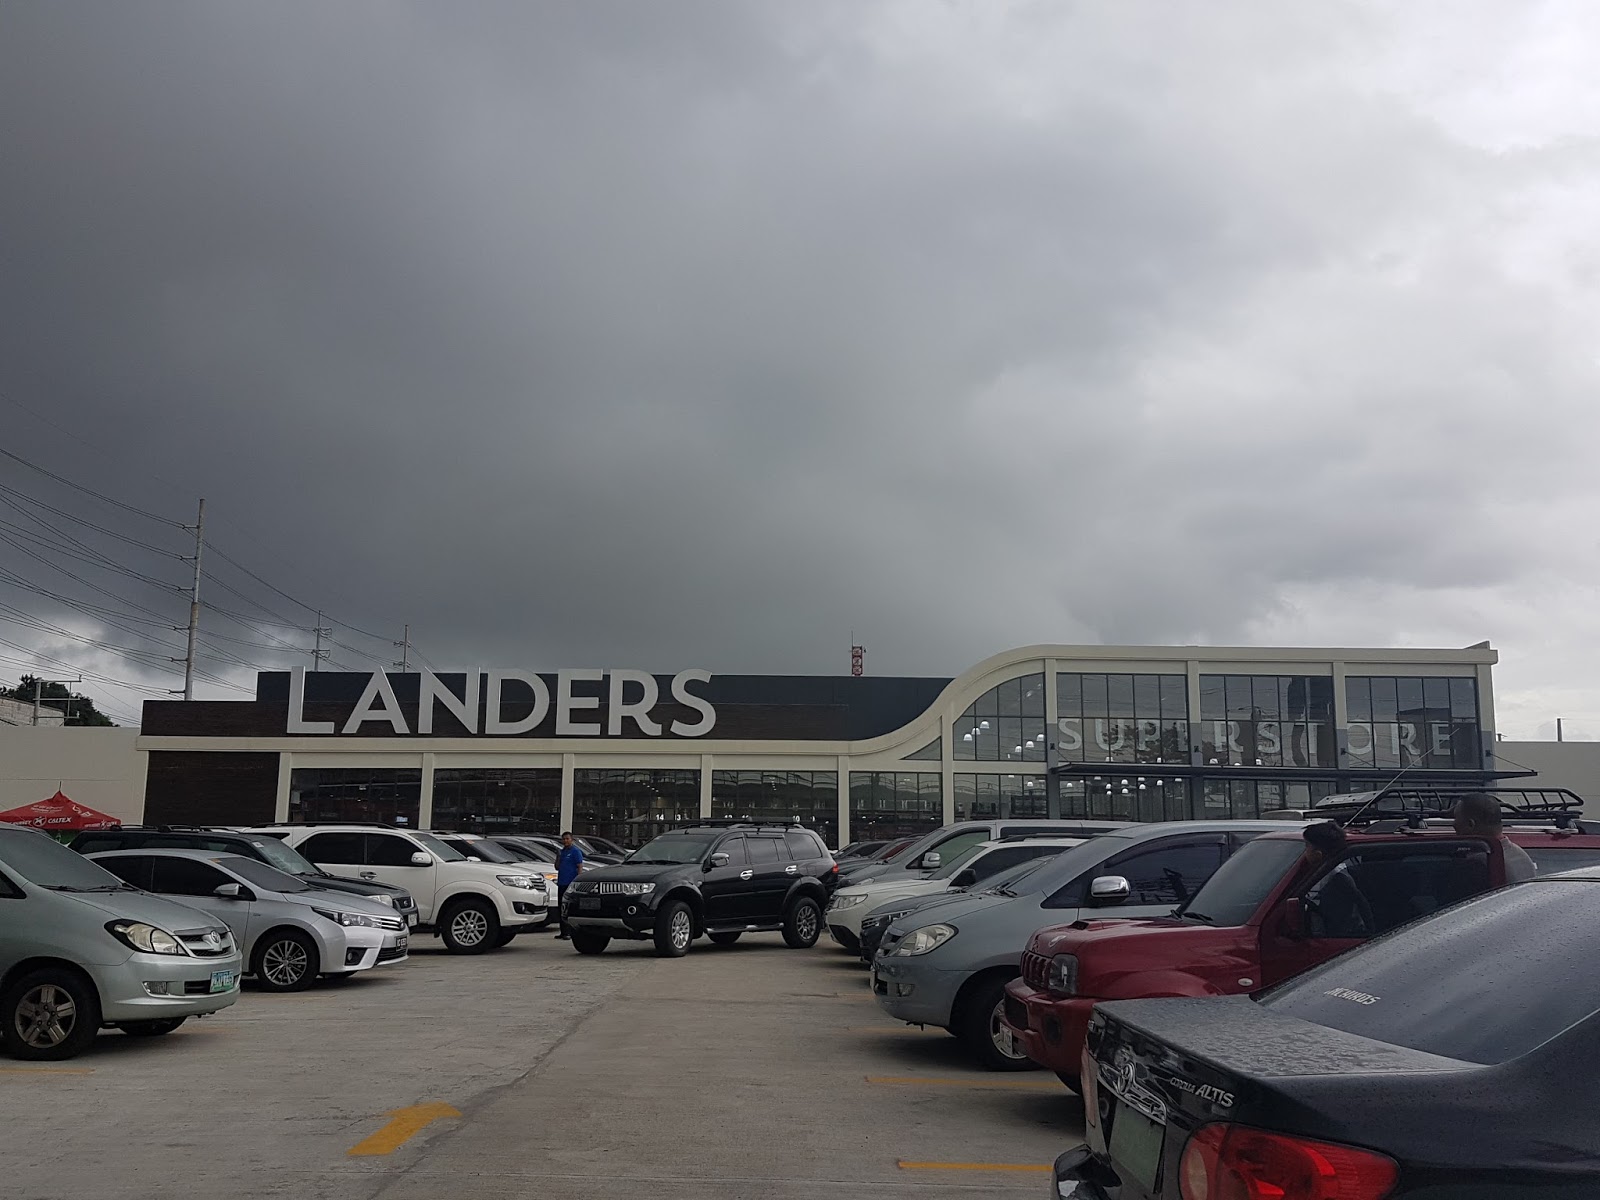 tey's fleeting moments -: Endless Shopping Options in Landers Superstore